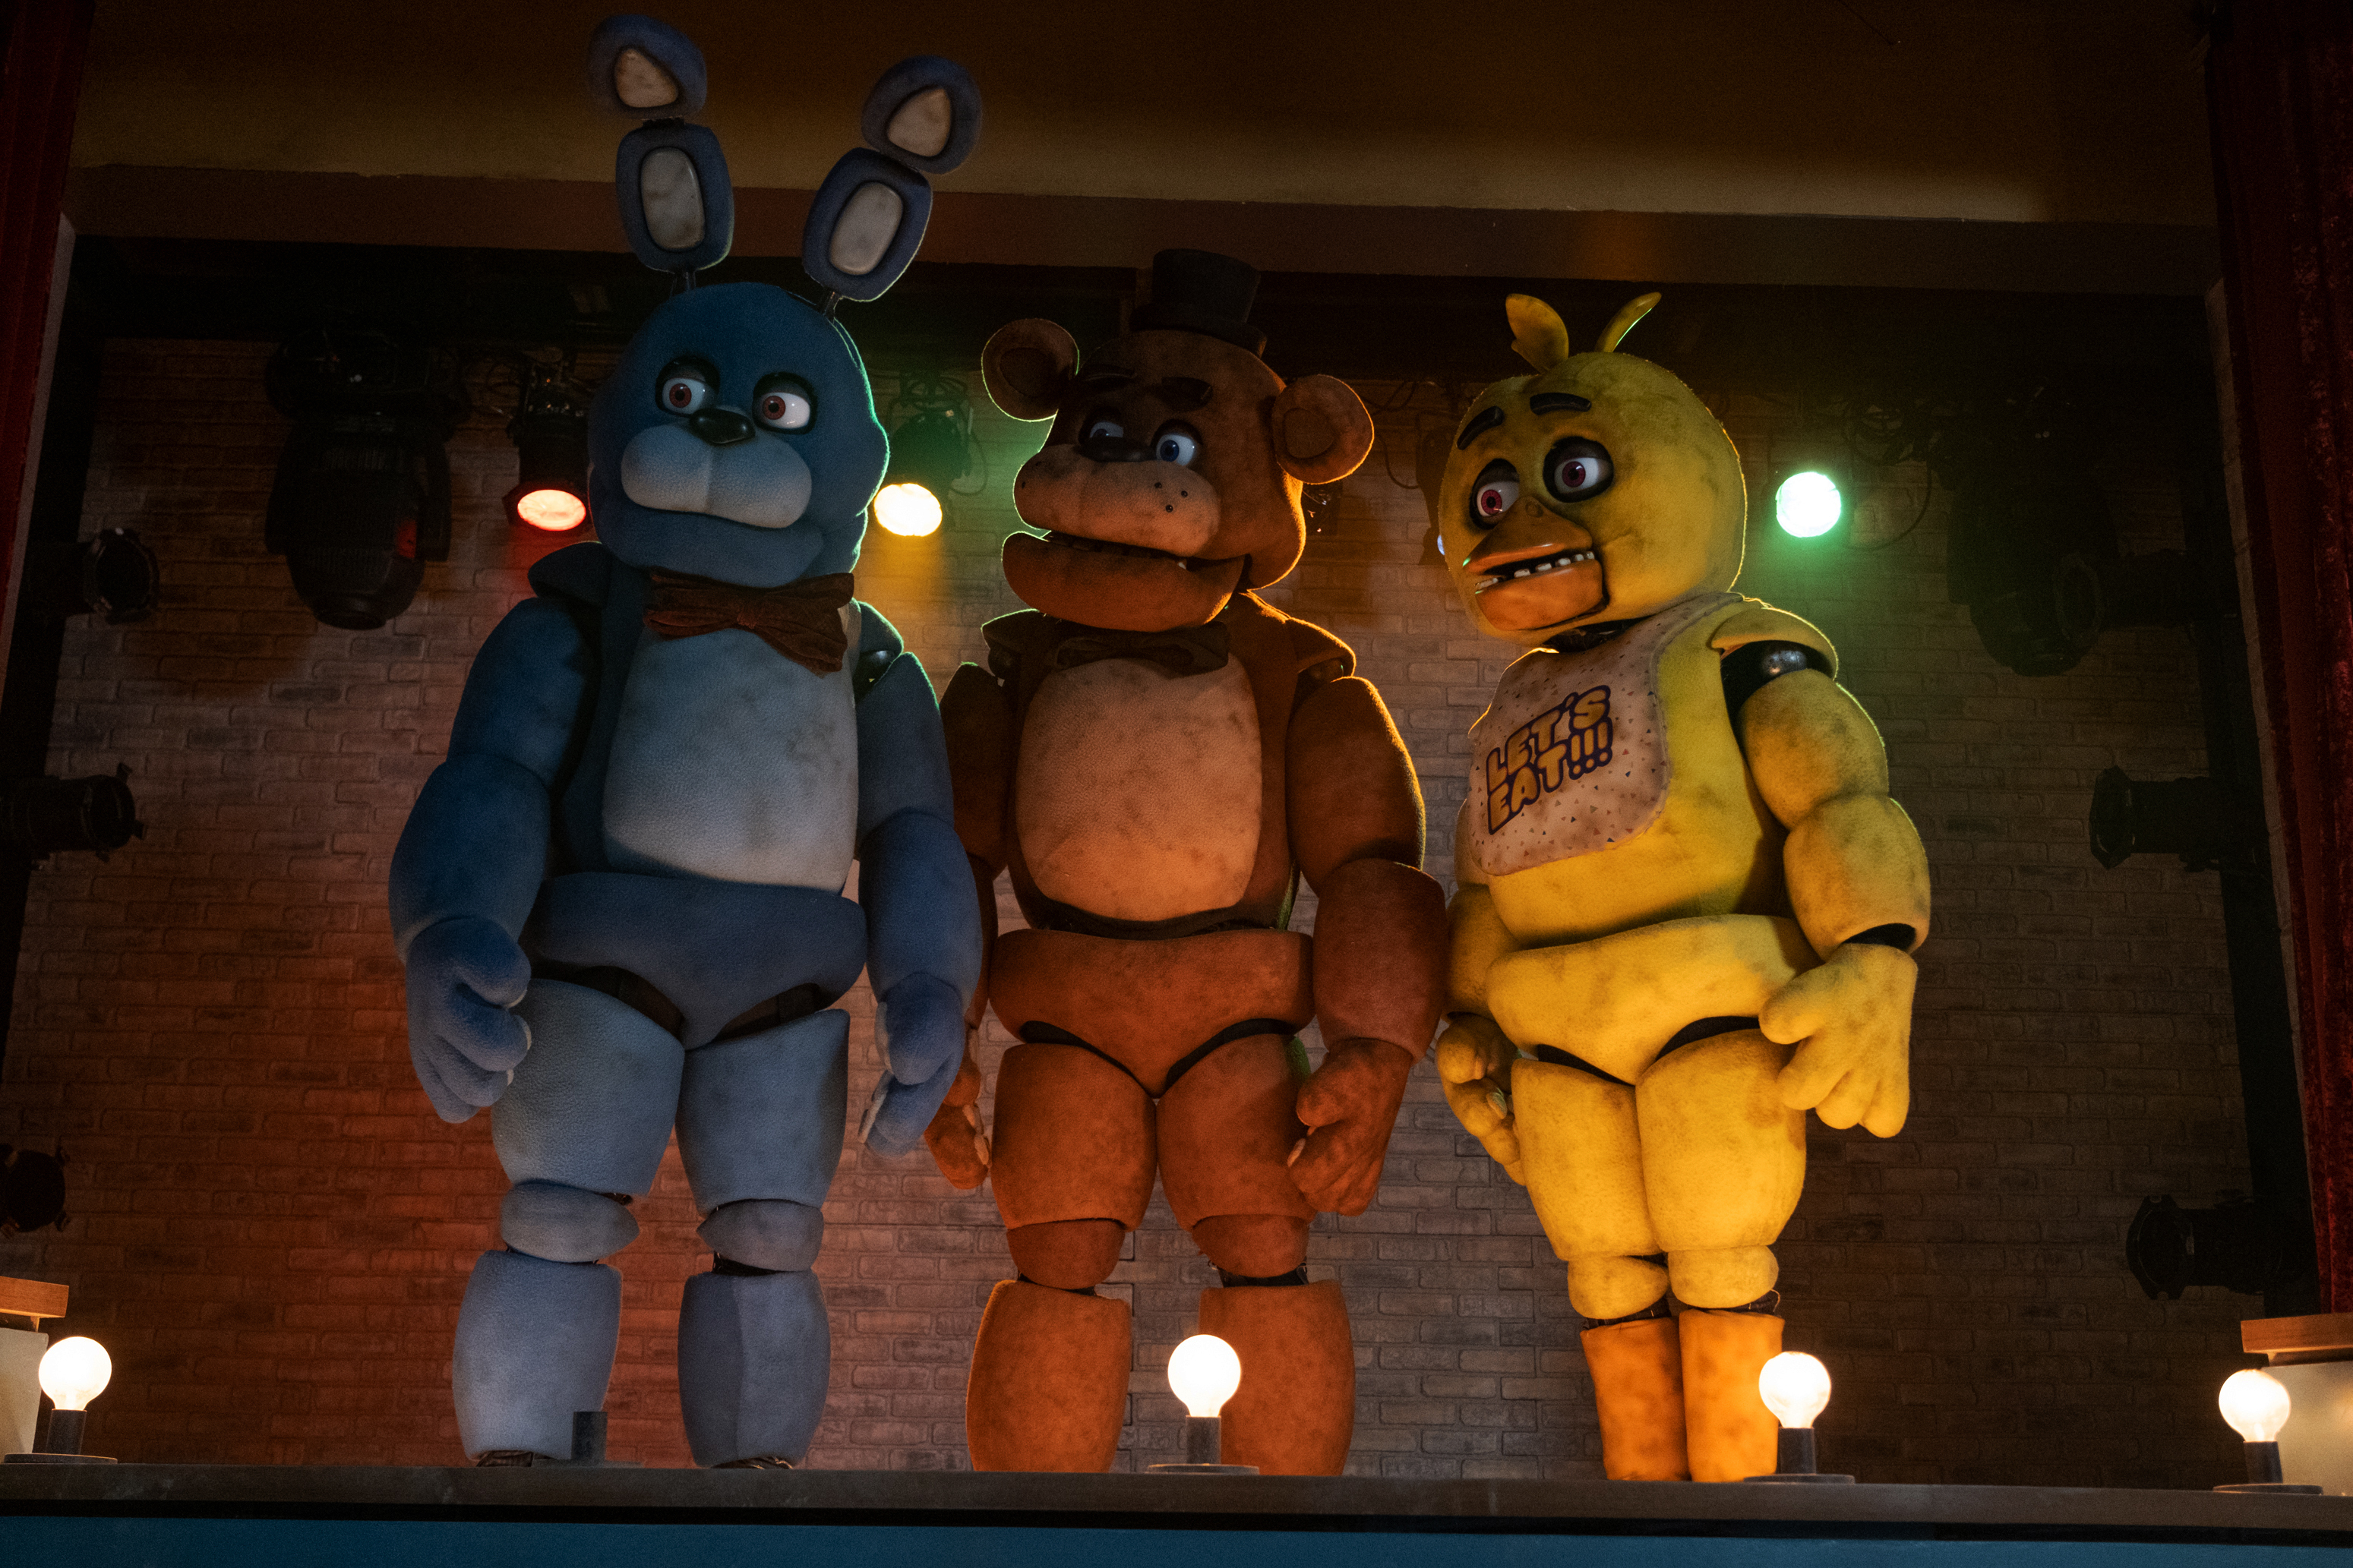 HD wallpaper of Five Nights at Freddy's characters Bonnie, Freddy, and Chica on stage for desktop background.